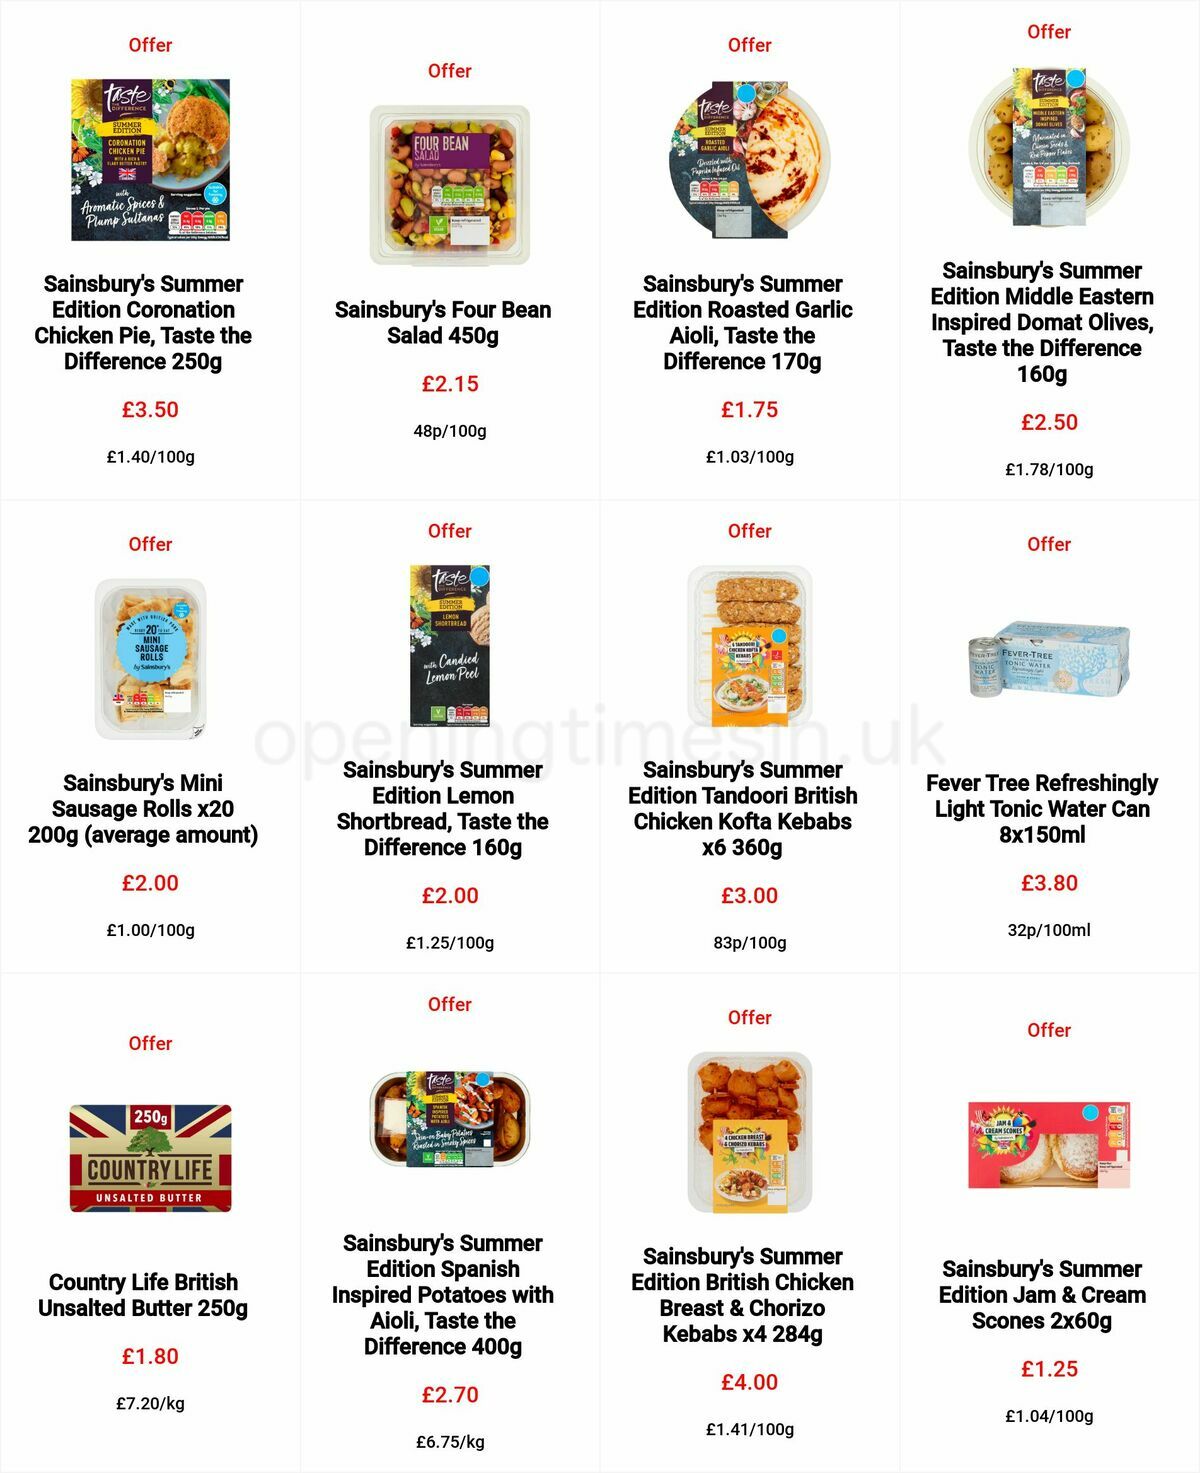 Sainsbury's Jubilee Celebration Offers from 2 June